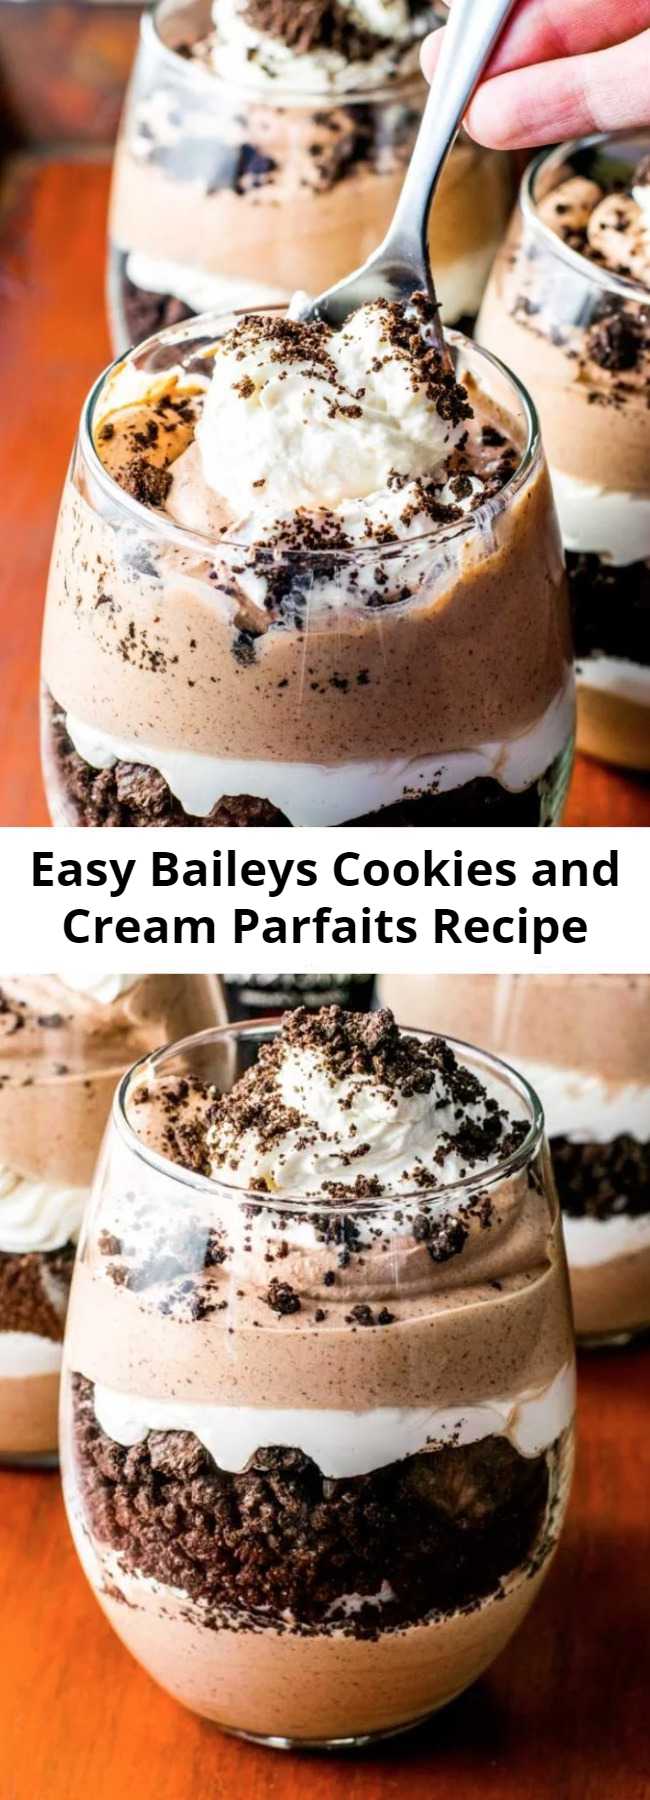 Easy Baileys Cookies and Cream Parfaits Recipe - Layered chocolate and Baileys cream paired with crumbled Oreo cookies. This delicious Baileys parfait is the perfect weekend retreat!